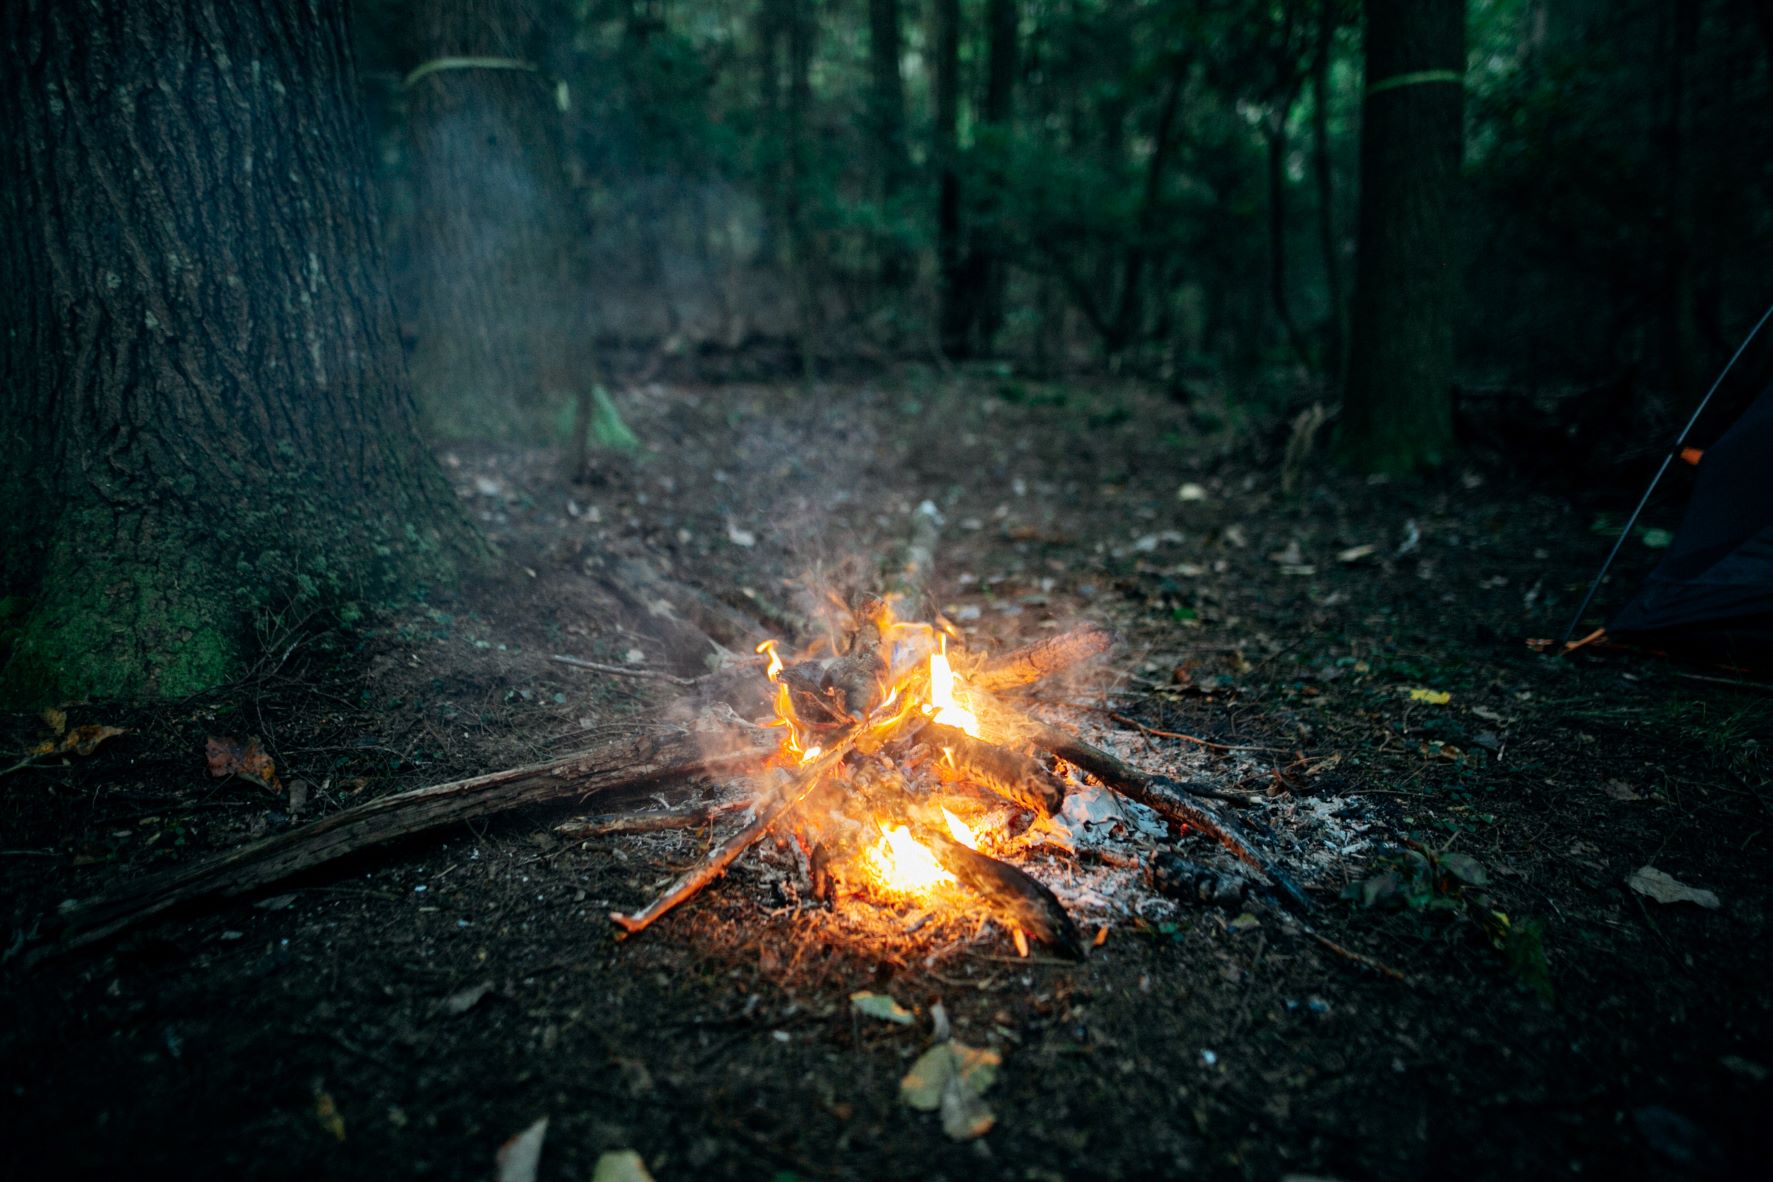 Burning bonefire in forest - Image by Kelly L from Pexel